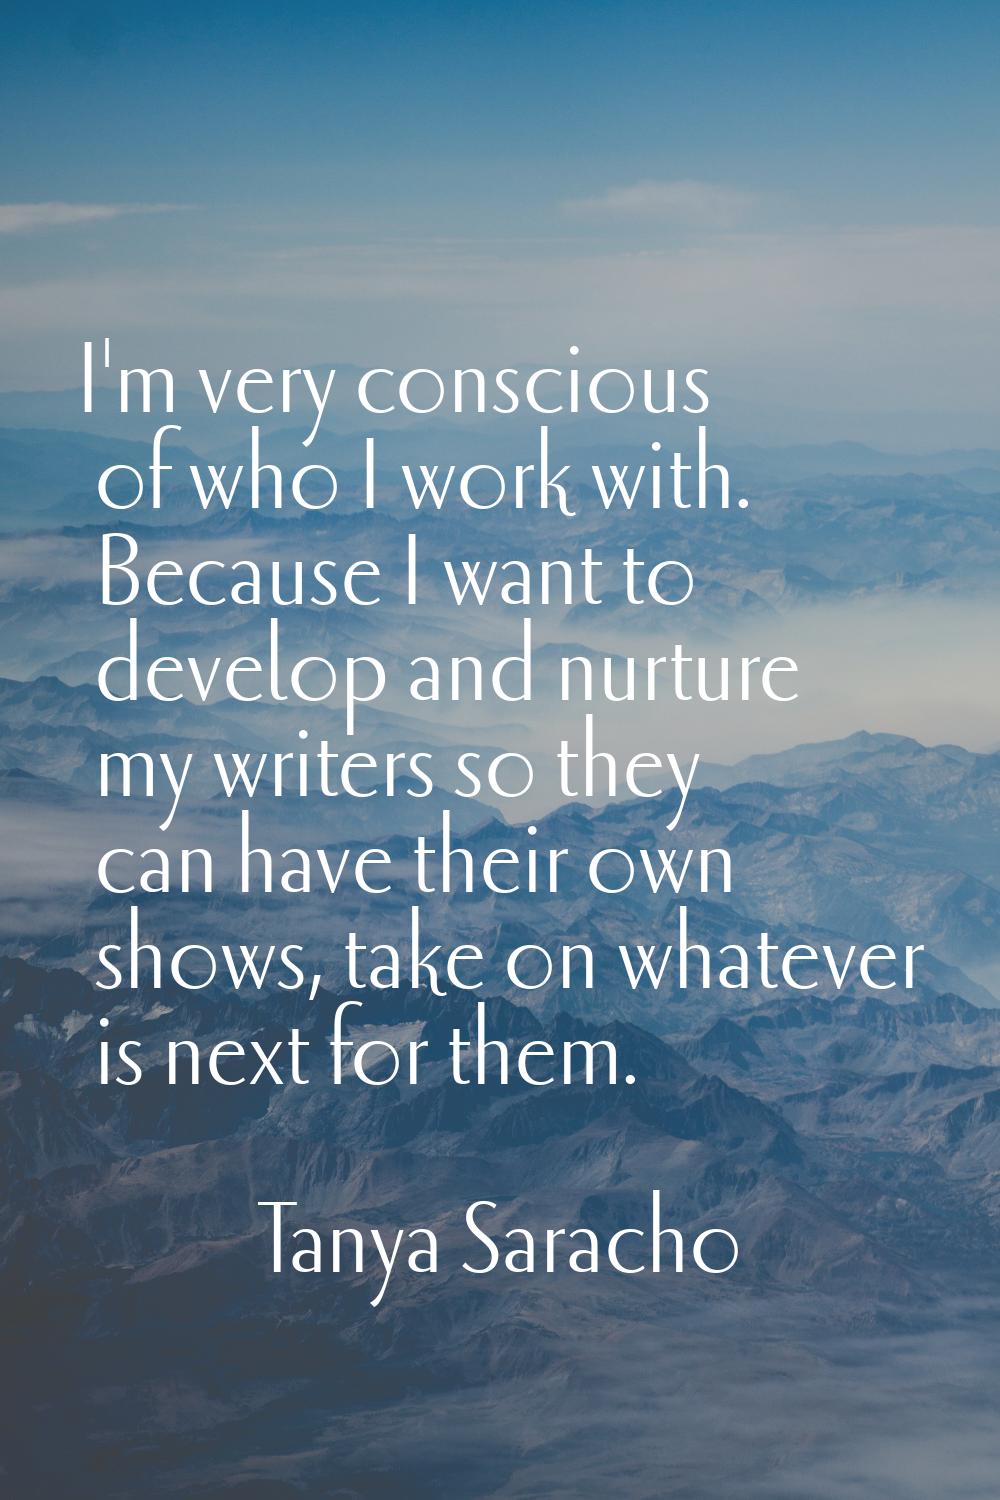 I'm very conscious of who I work with. Because I want to develop and nurture my writers so they can